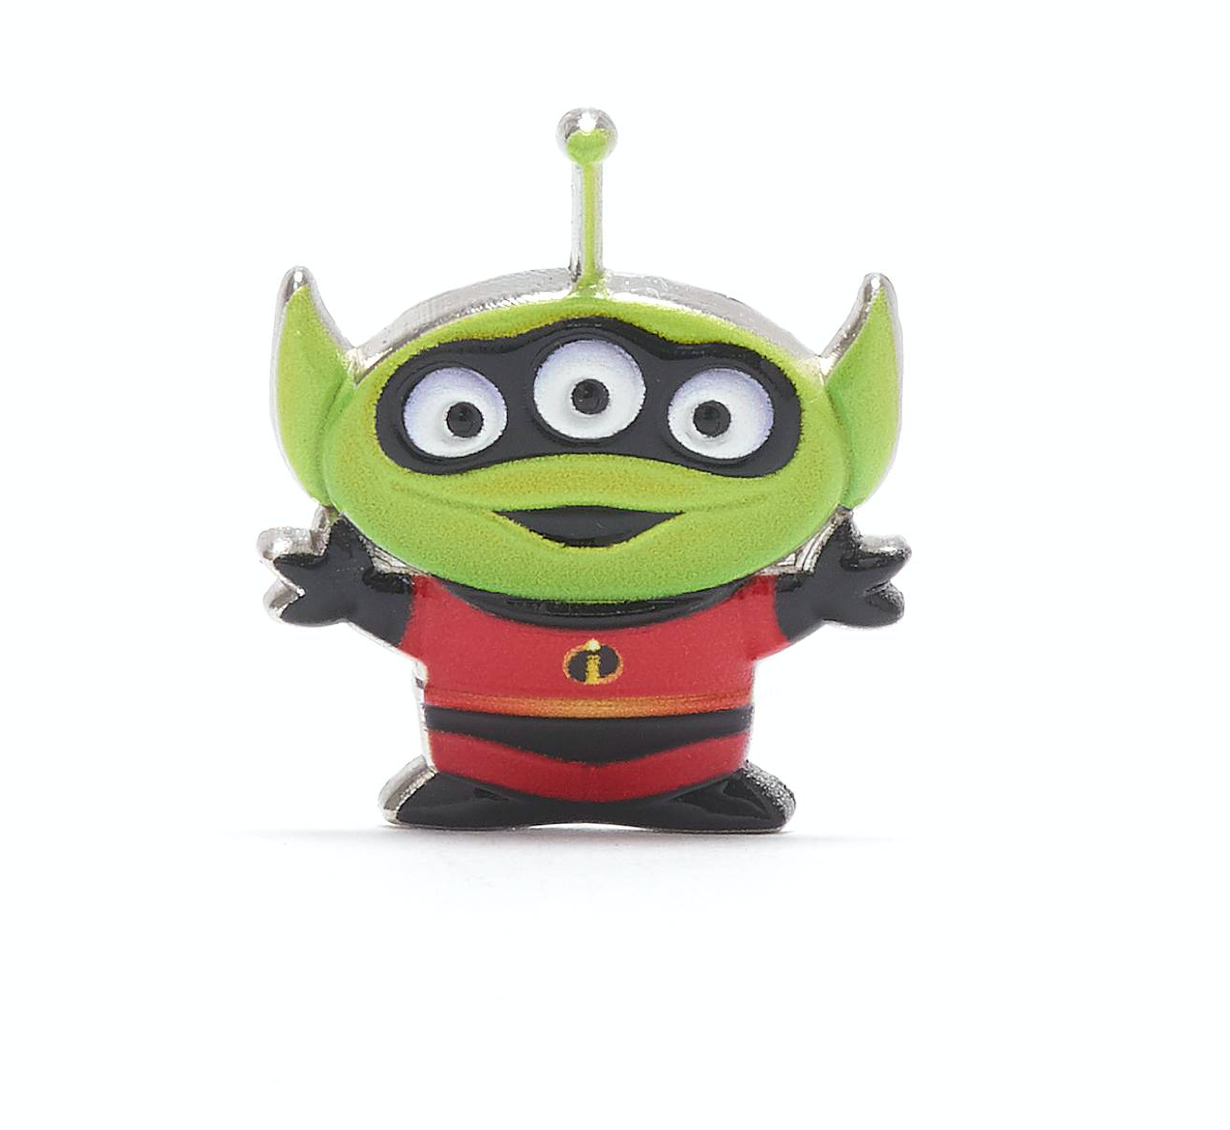 Disney Toy Story Alien Pixar Remix Pin Mr. Incredible Limited Release New